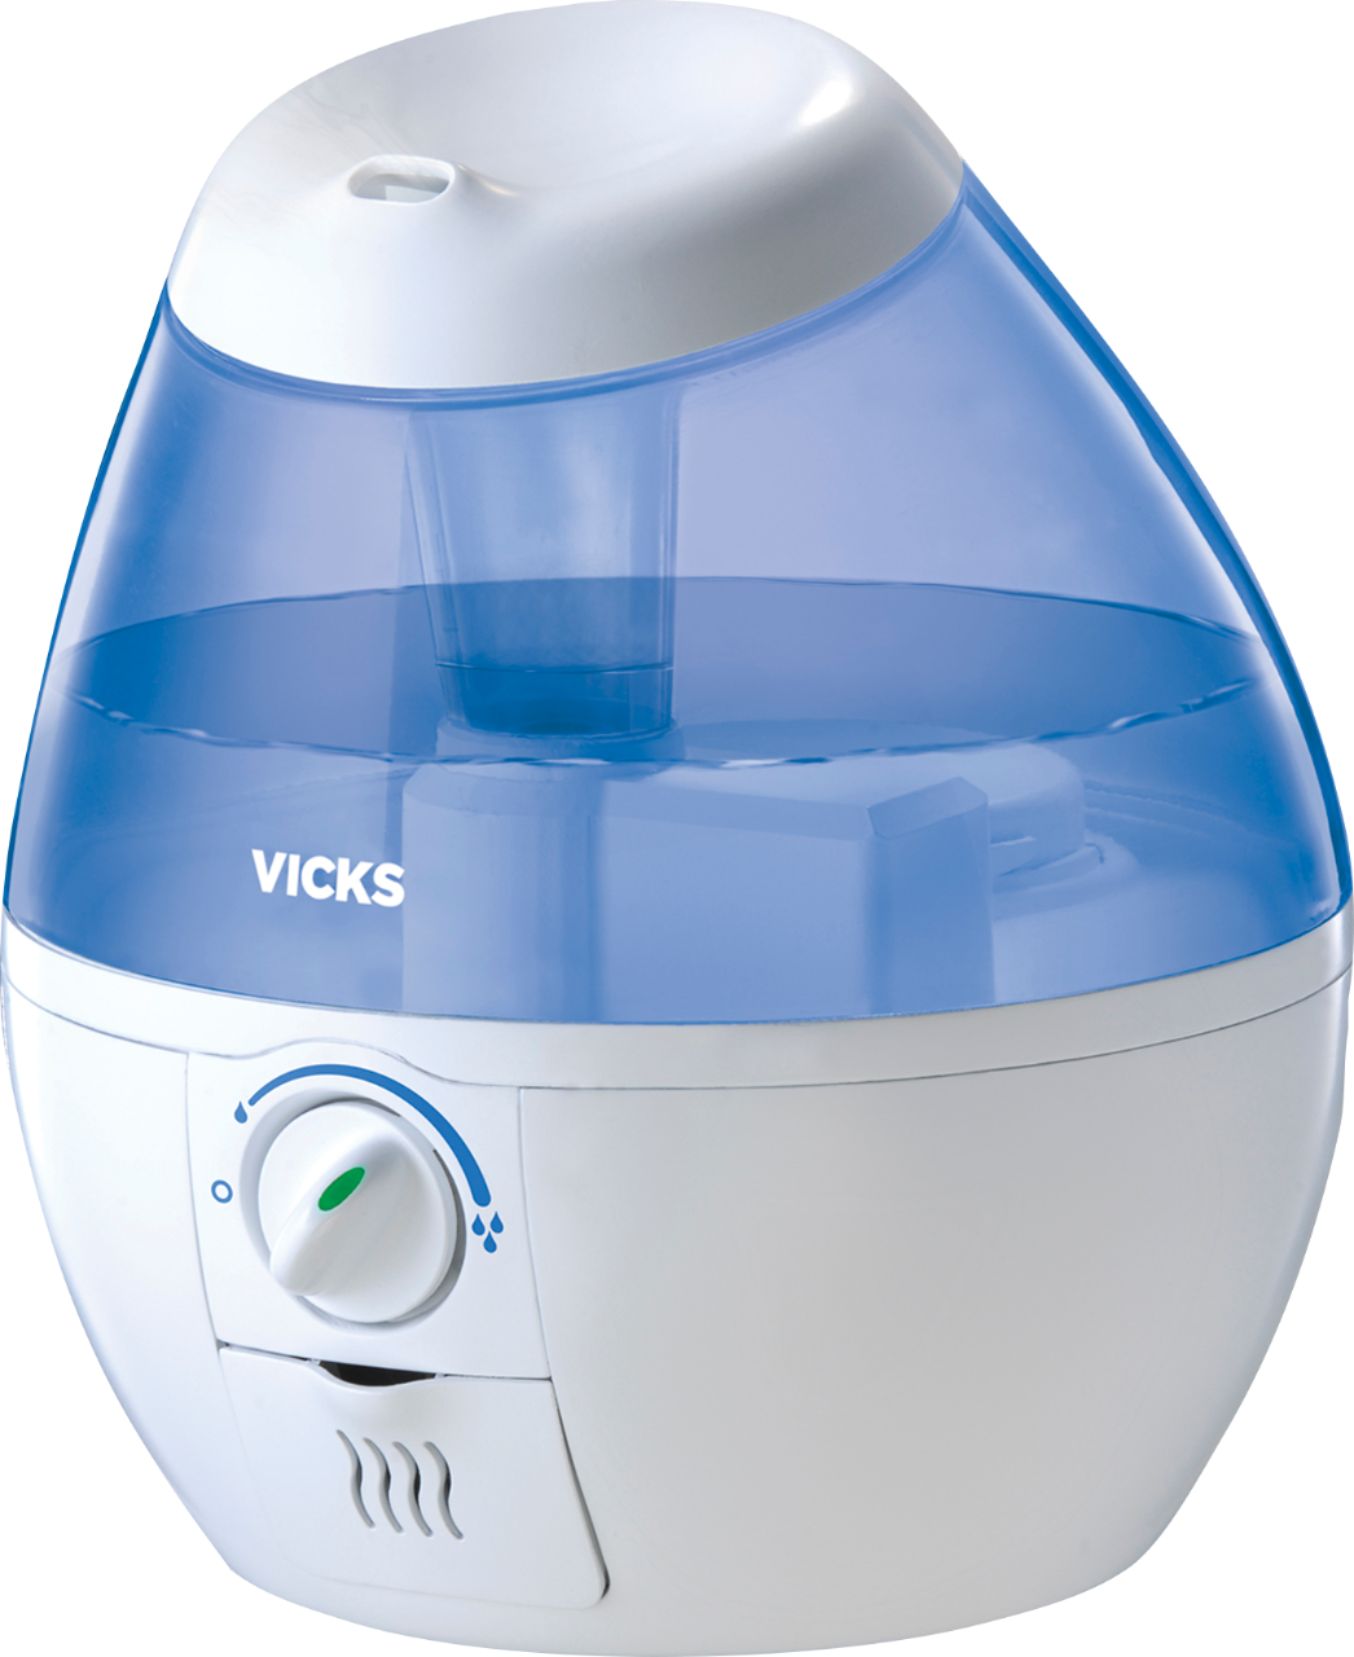 ADDvox Bottled Water Personal Humidifier